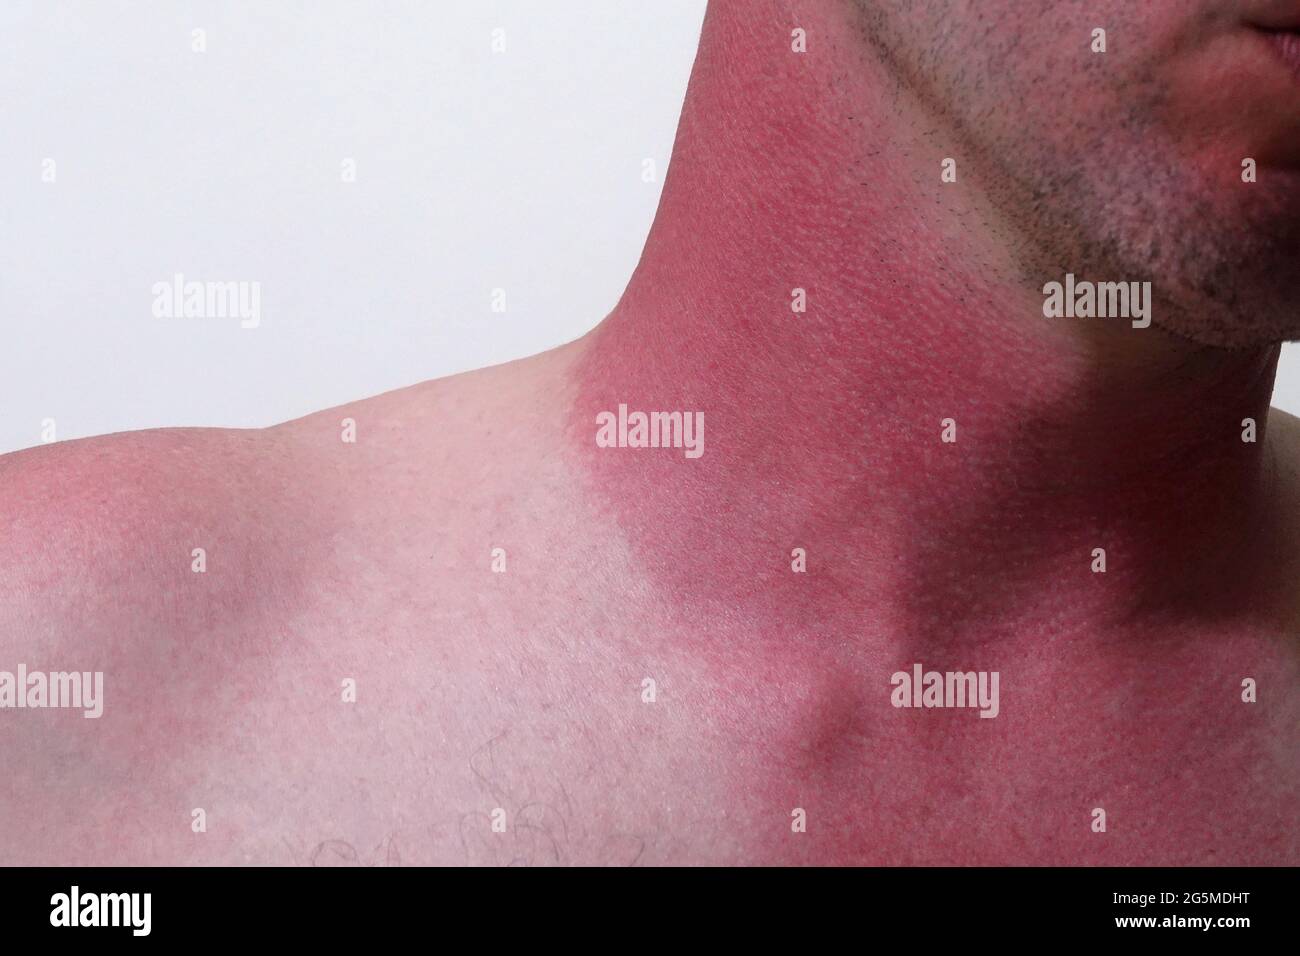 Red irritation from a sunburn is shown on the neck of a white male in an up close view. Stock Photo